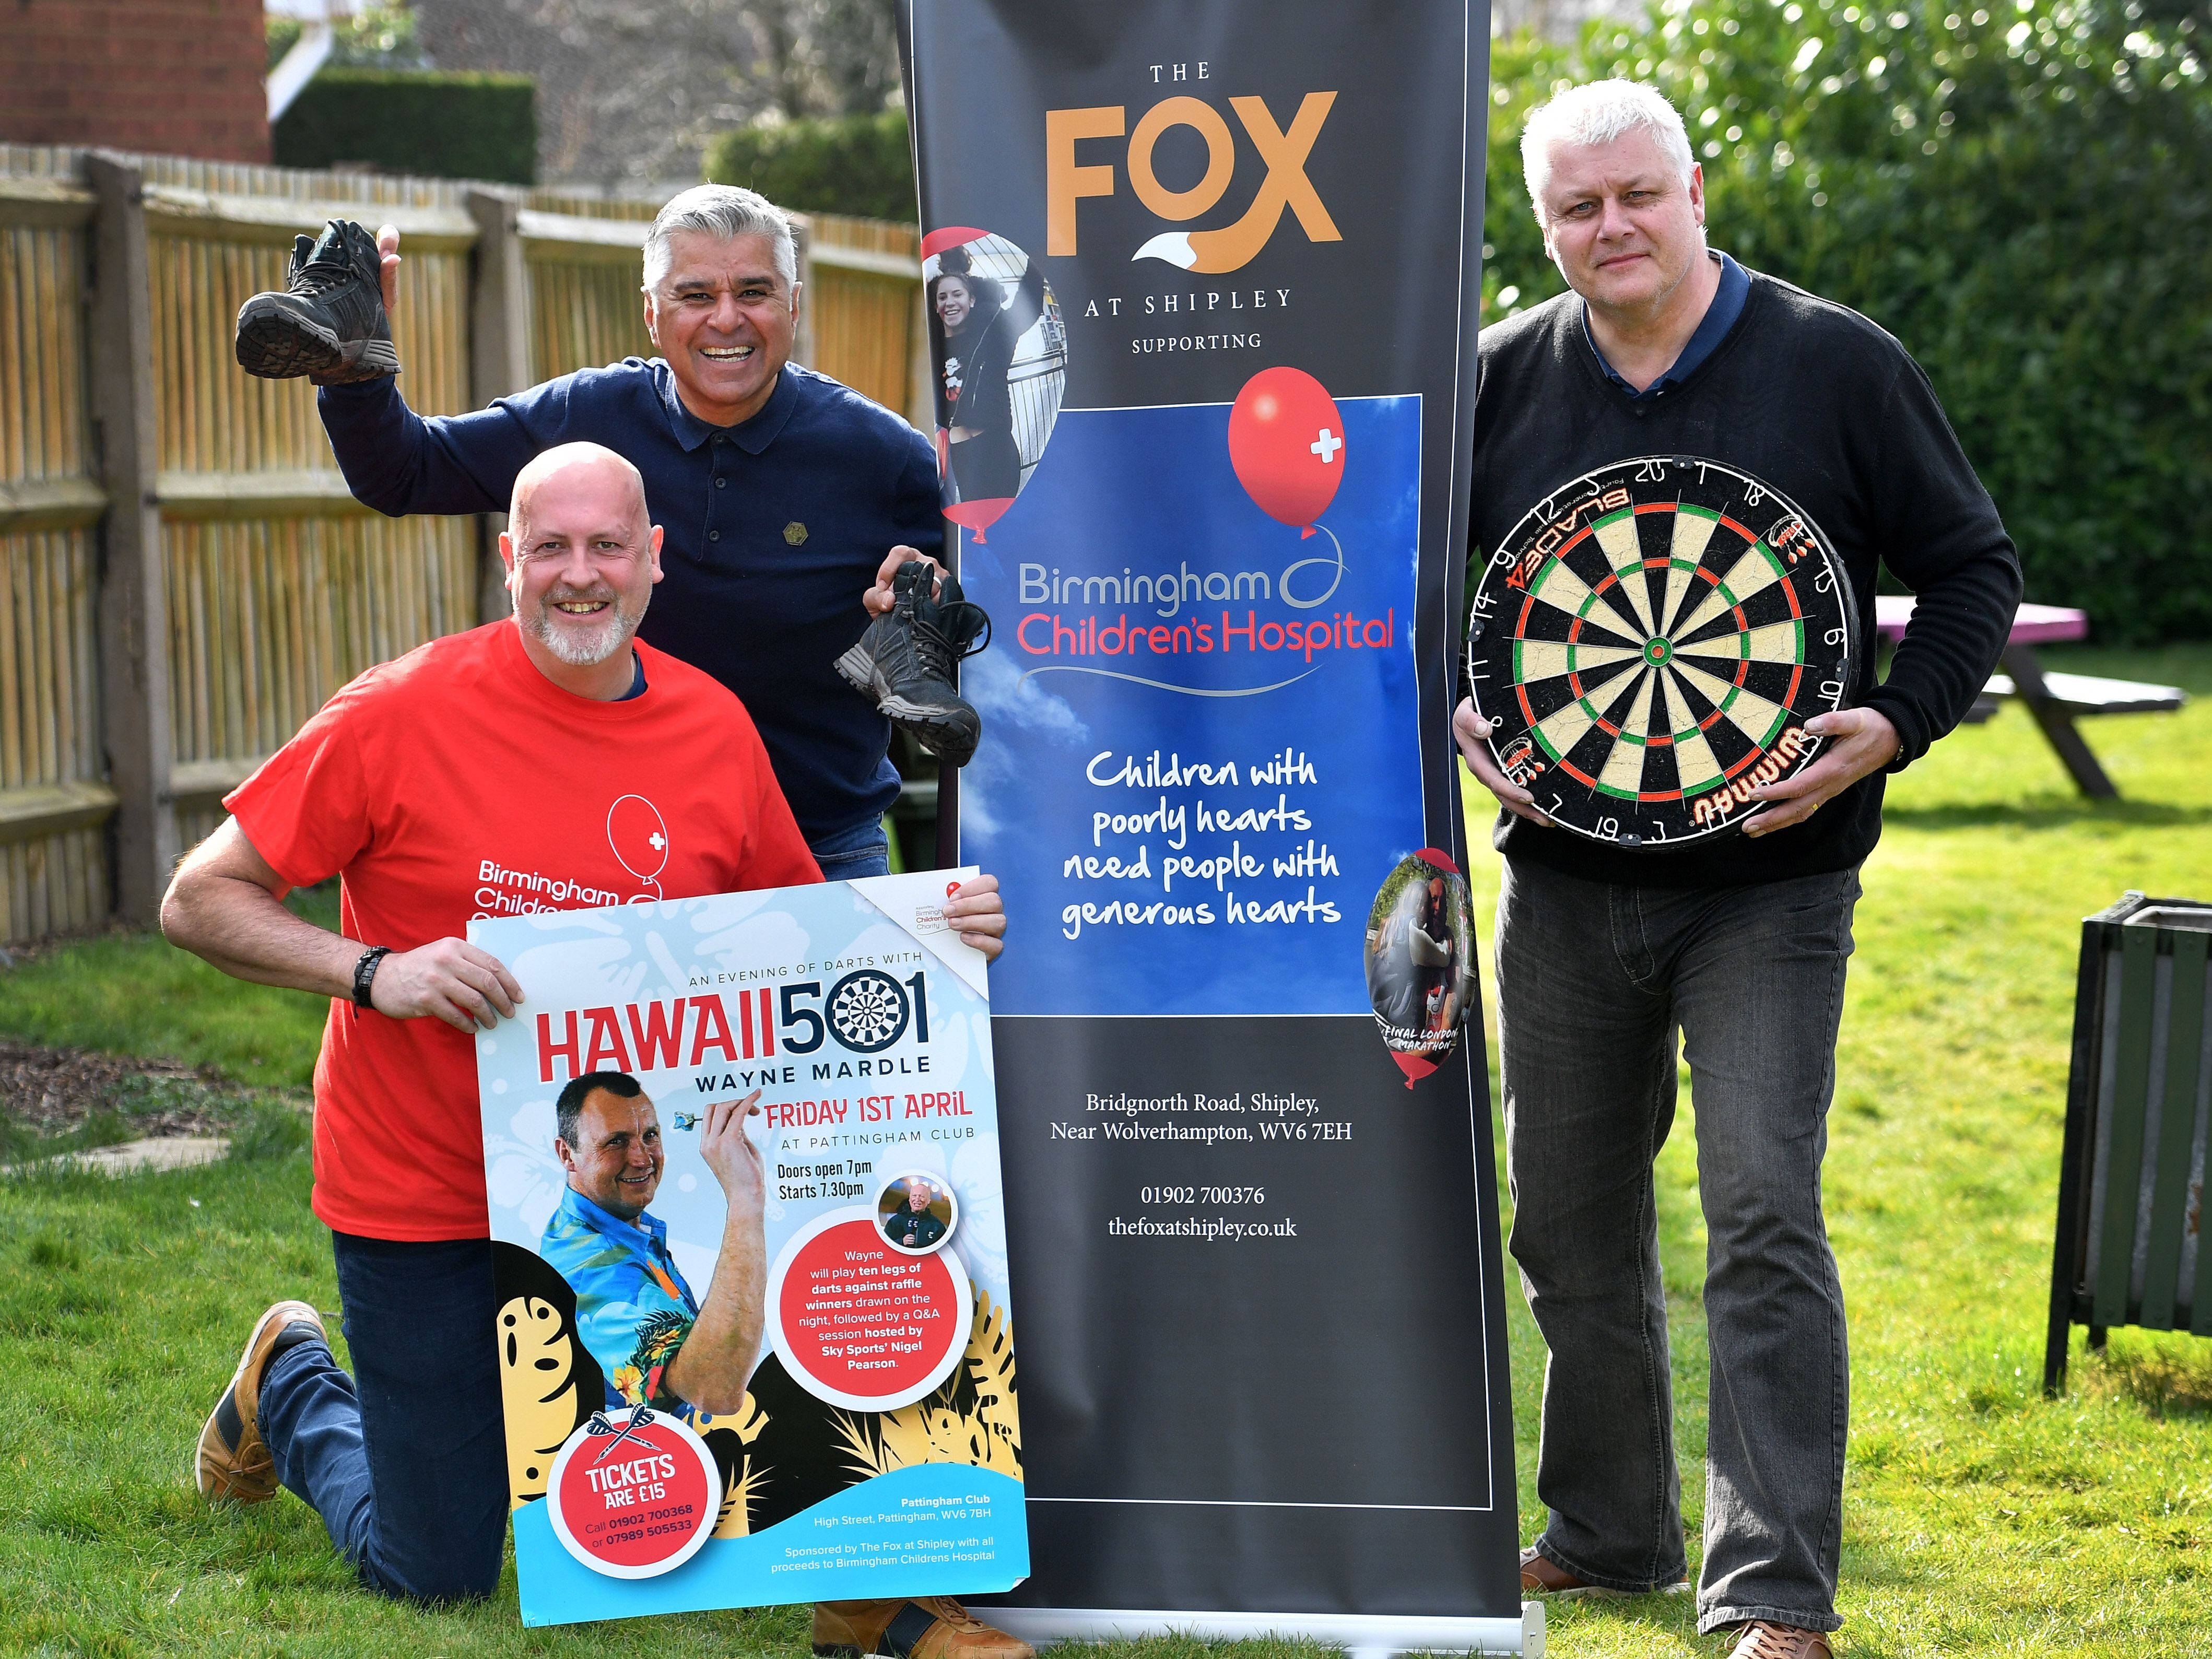 Darts night in Pattingham aiming to raise funds for Birmingham Children's Hospital 